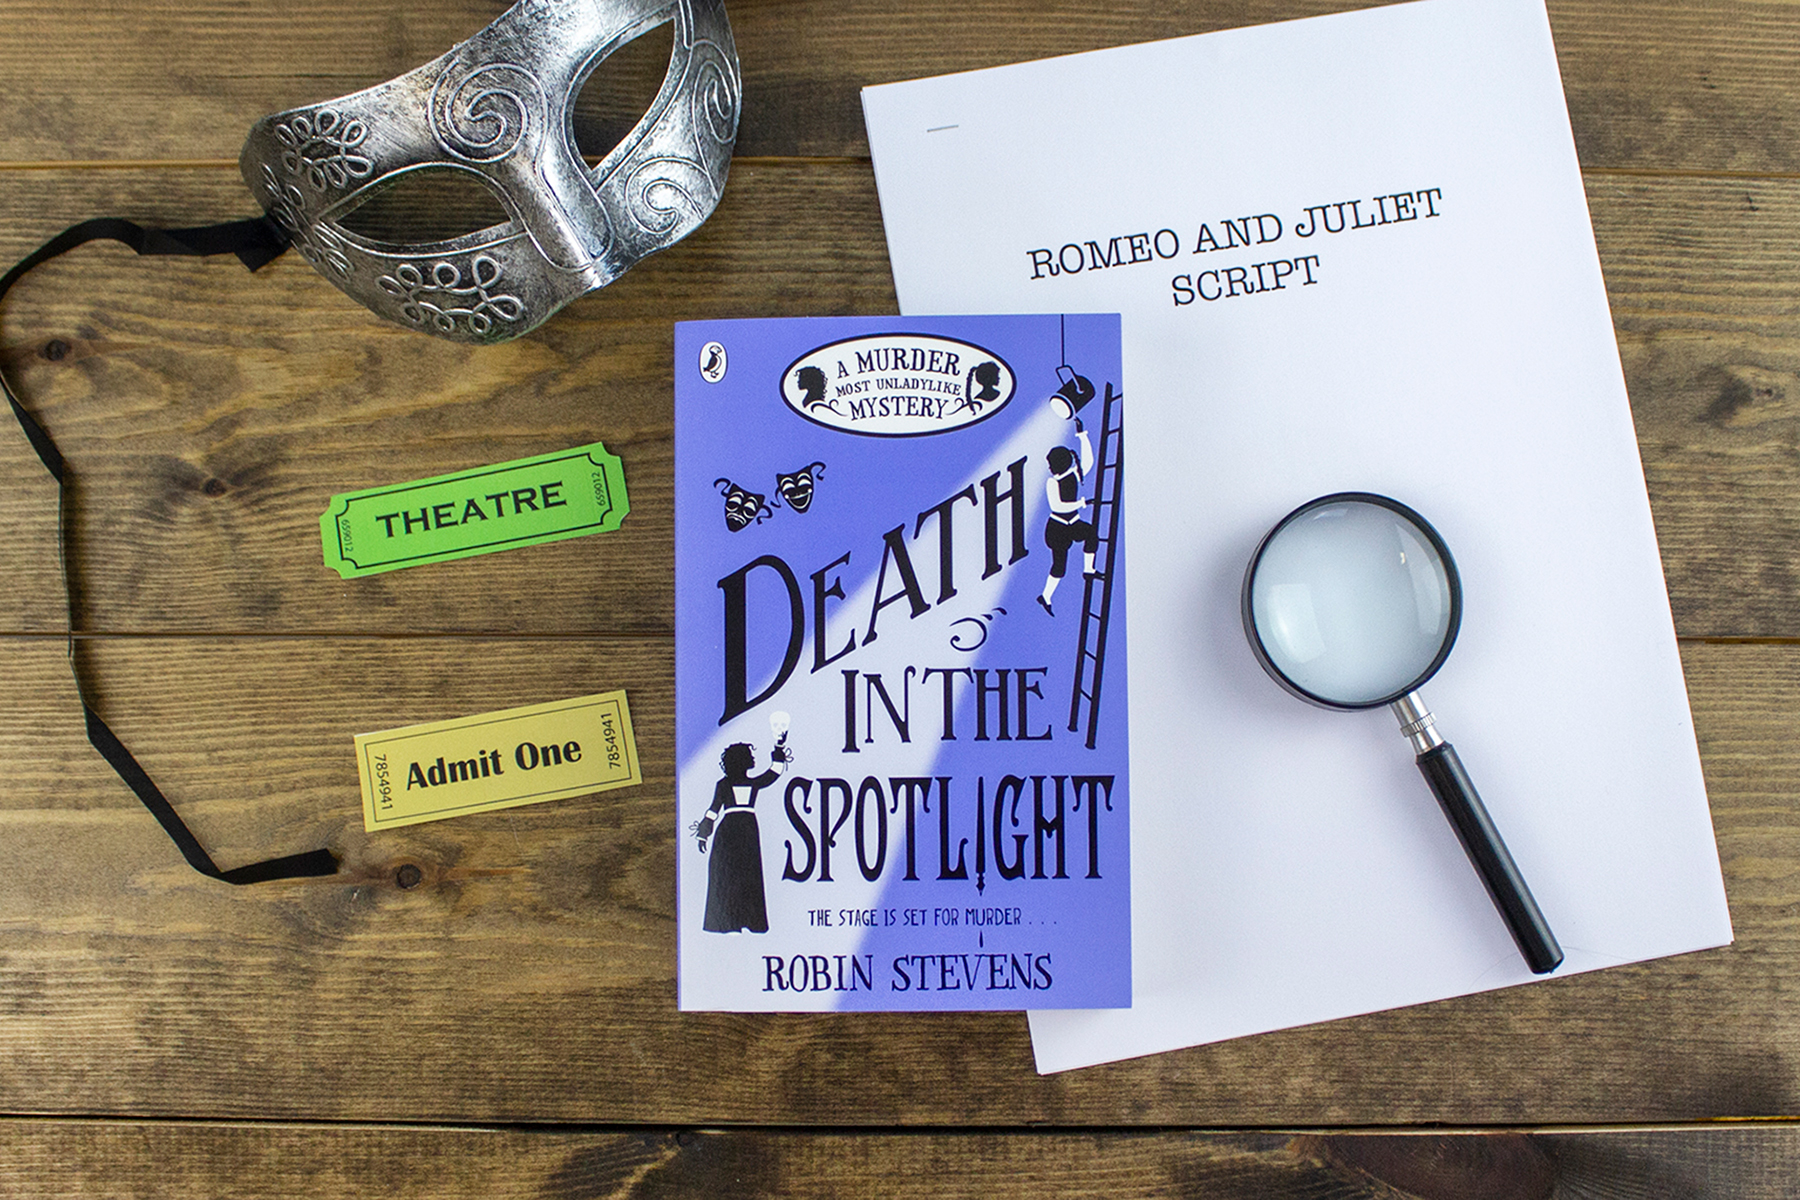 A image of Robin's Steven's book Death in the Spotlight on a wooden table background surrounded by theatre tickets, a Romeo & Juliet script, a silver masquerade mask and a magnifying glass